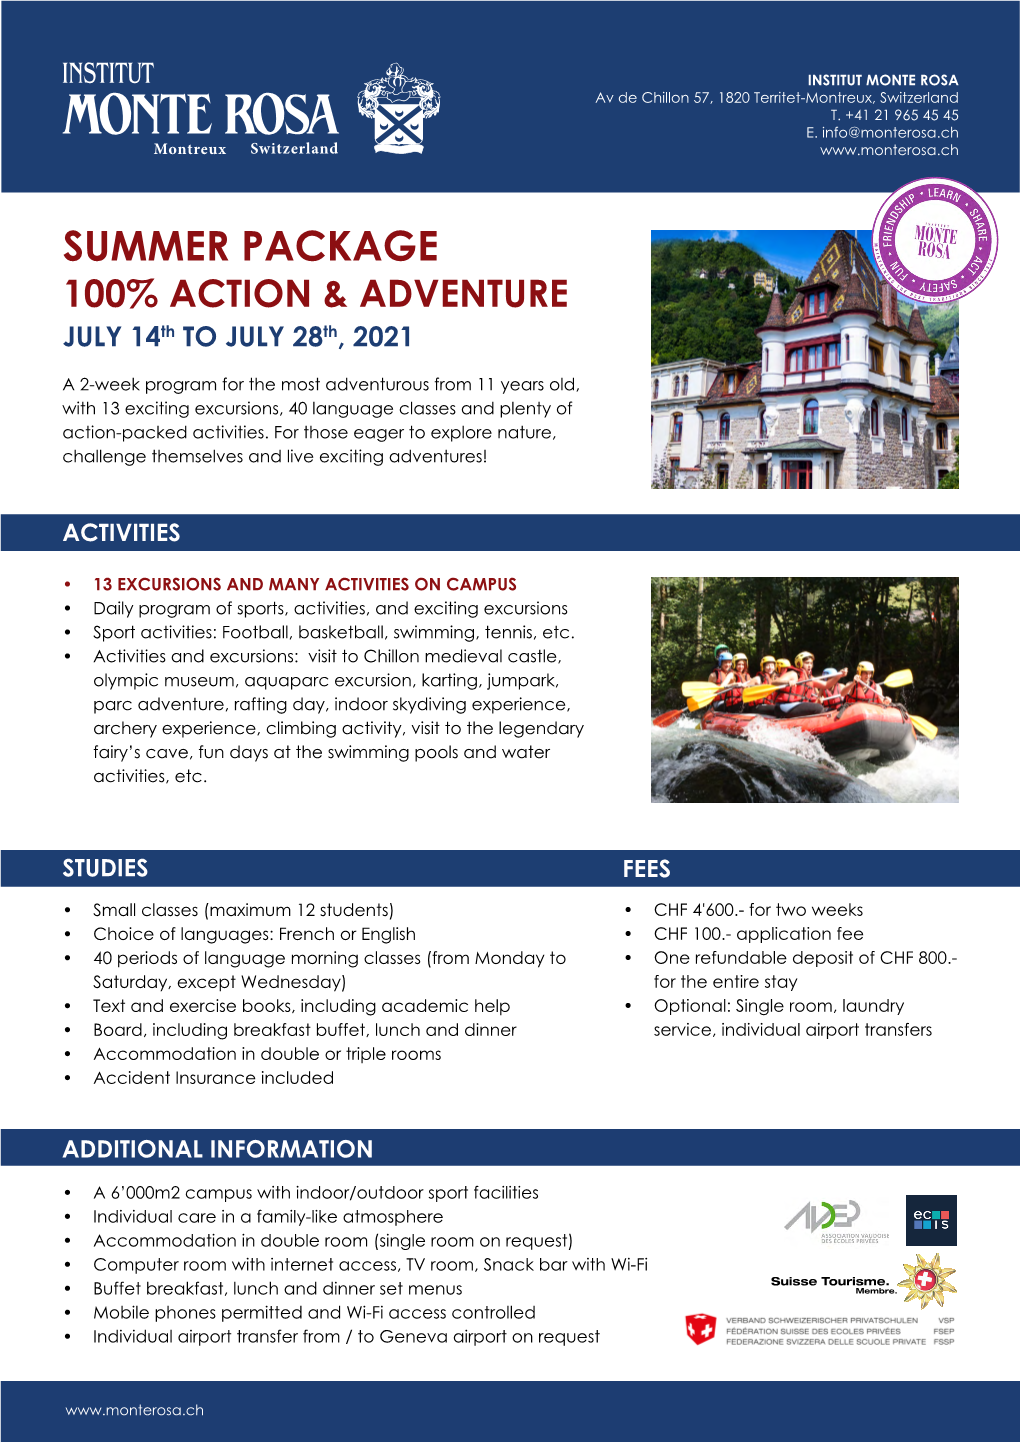 SUMMER PACKAGE 100% ACTION & ADVENTURE JULY 14Th to JULY 28Th, 2021